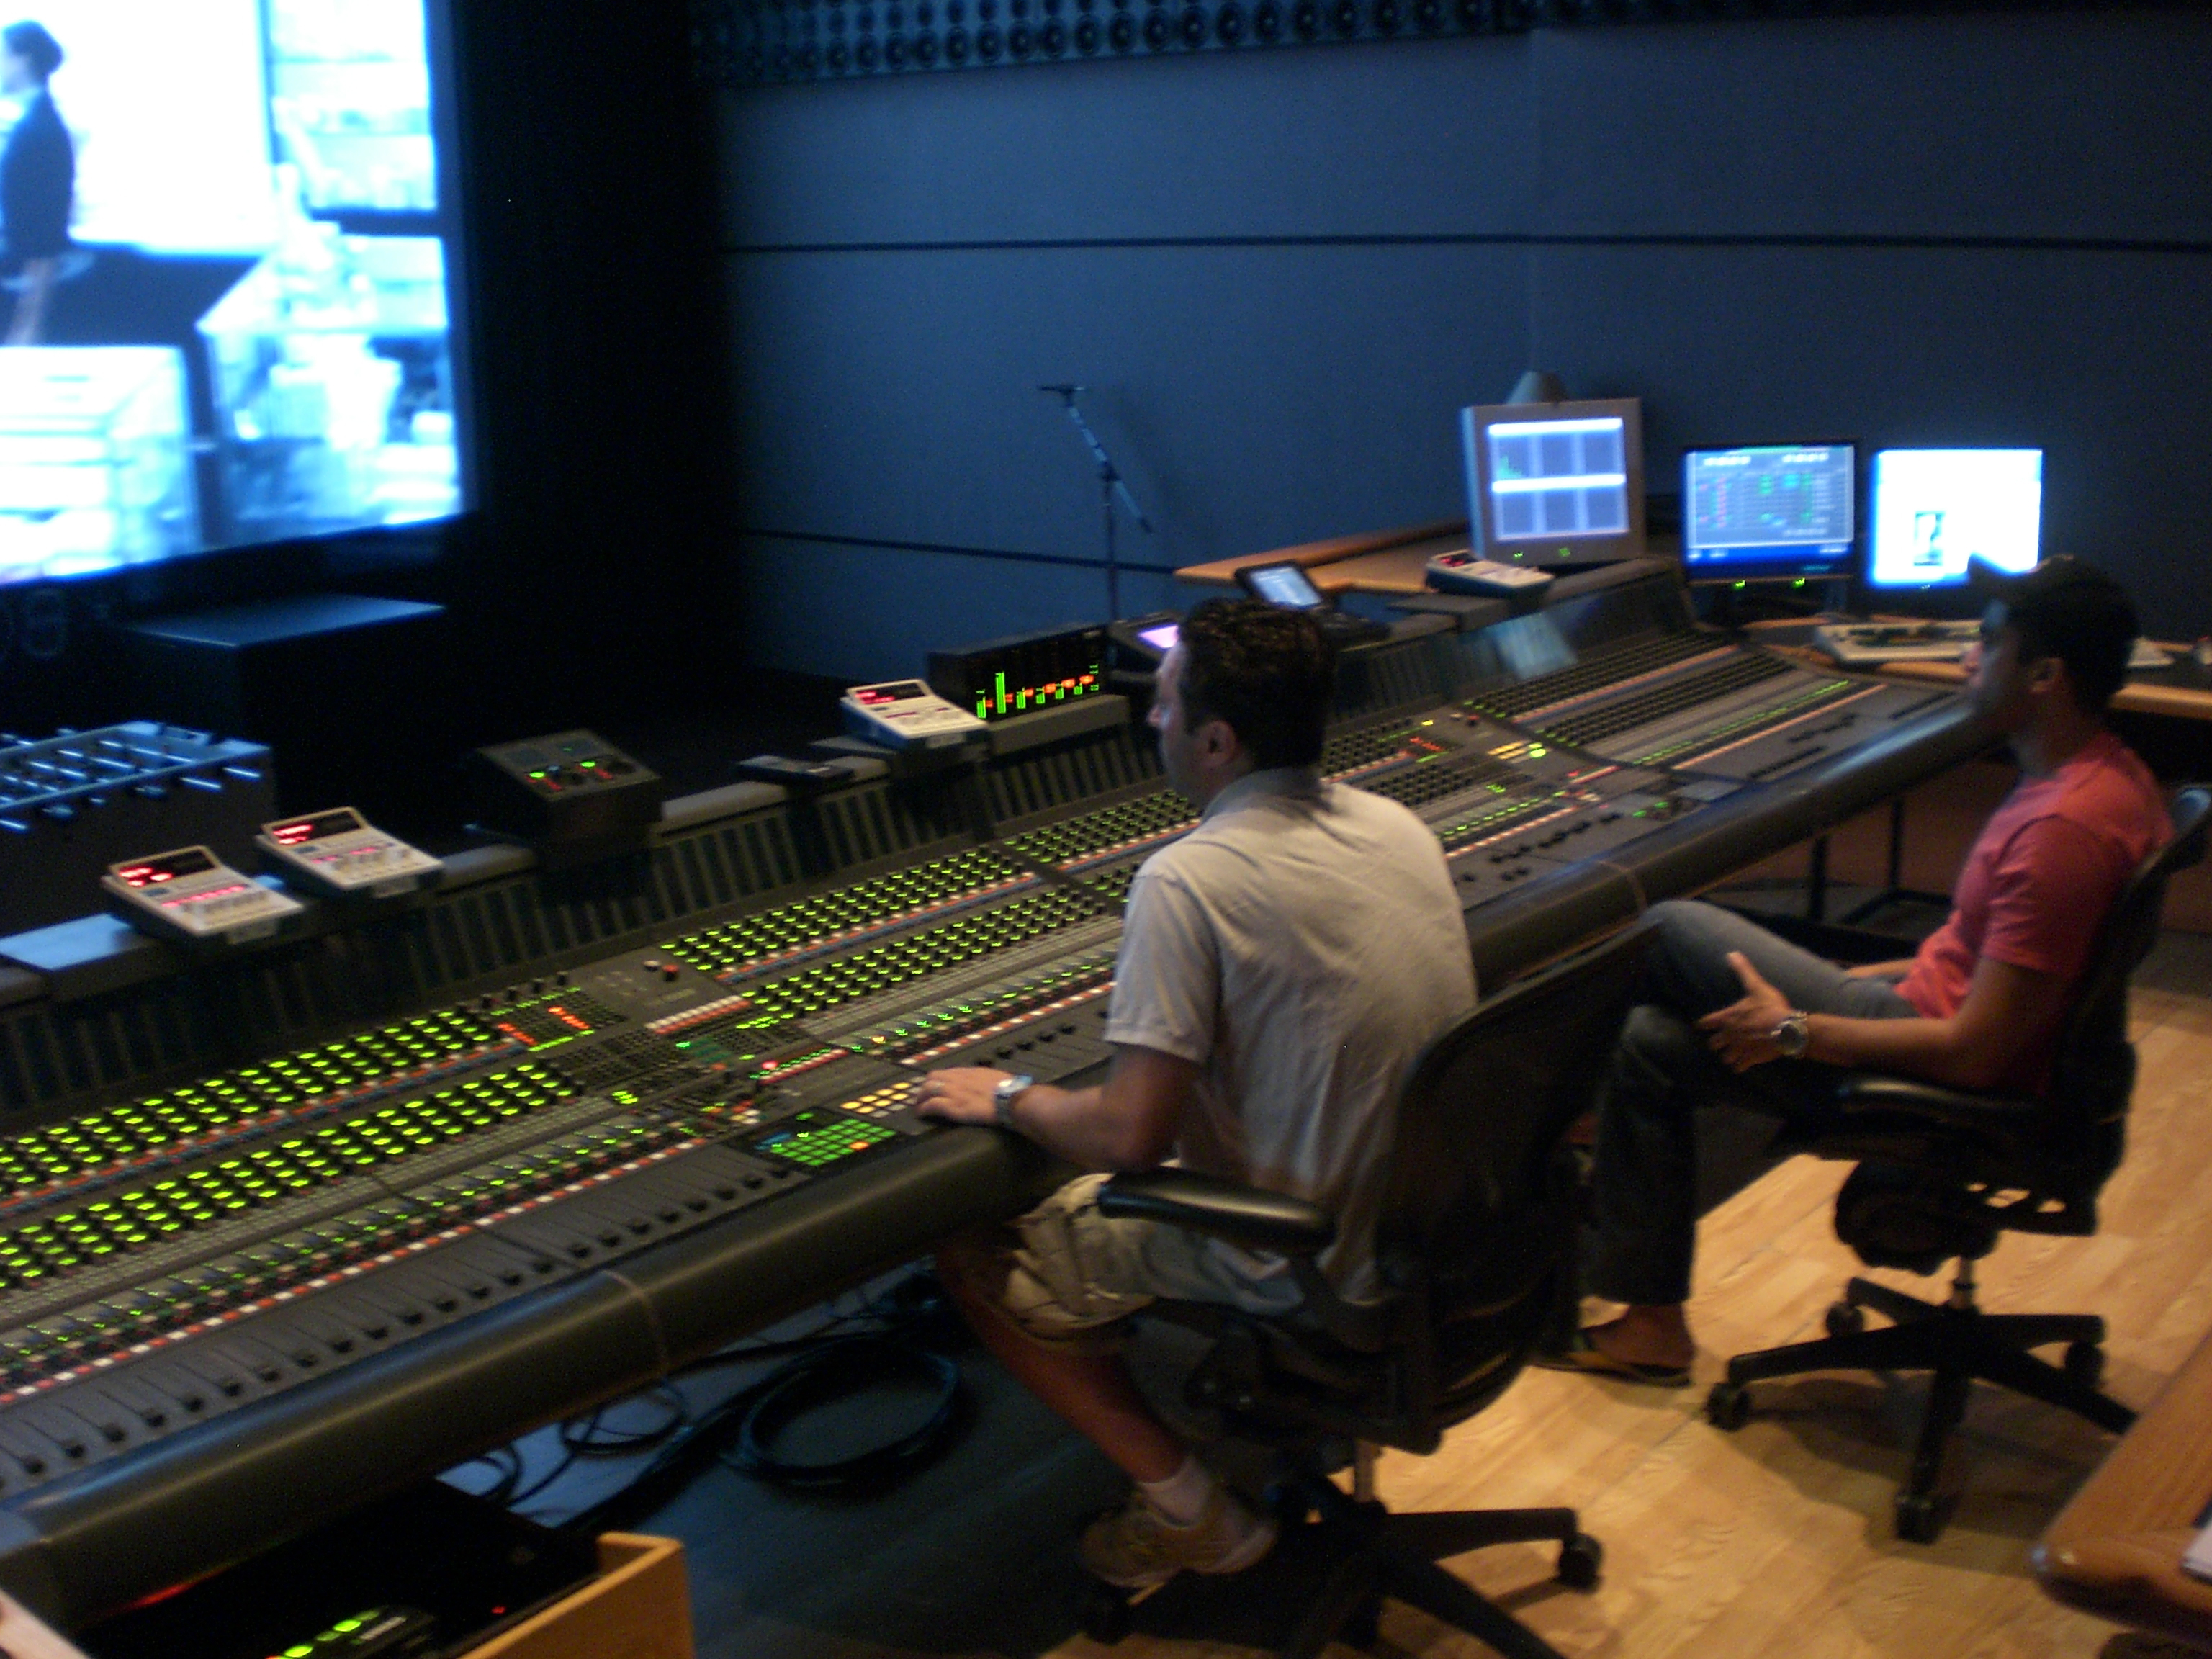 L to R: Re-Recording Mixer Aaron Levy and Warren Pereira review WHO'S GOOD LOOKING? sound design at TODD-AO before the files go to Dolby for MO for the 35mm print. August 17, 2009.